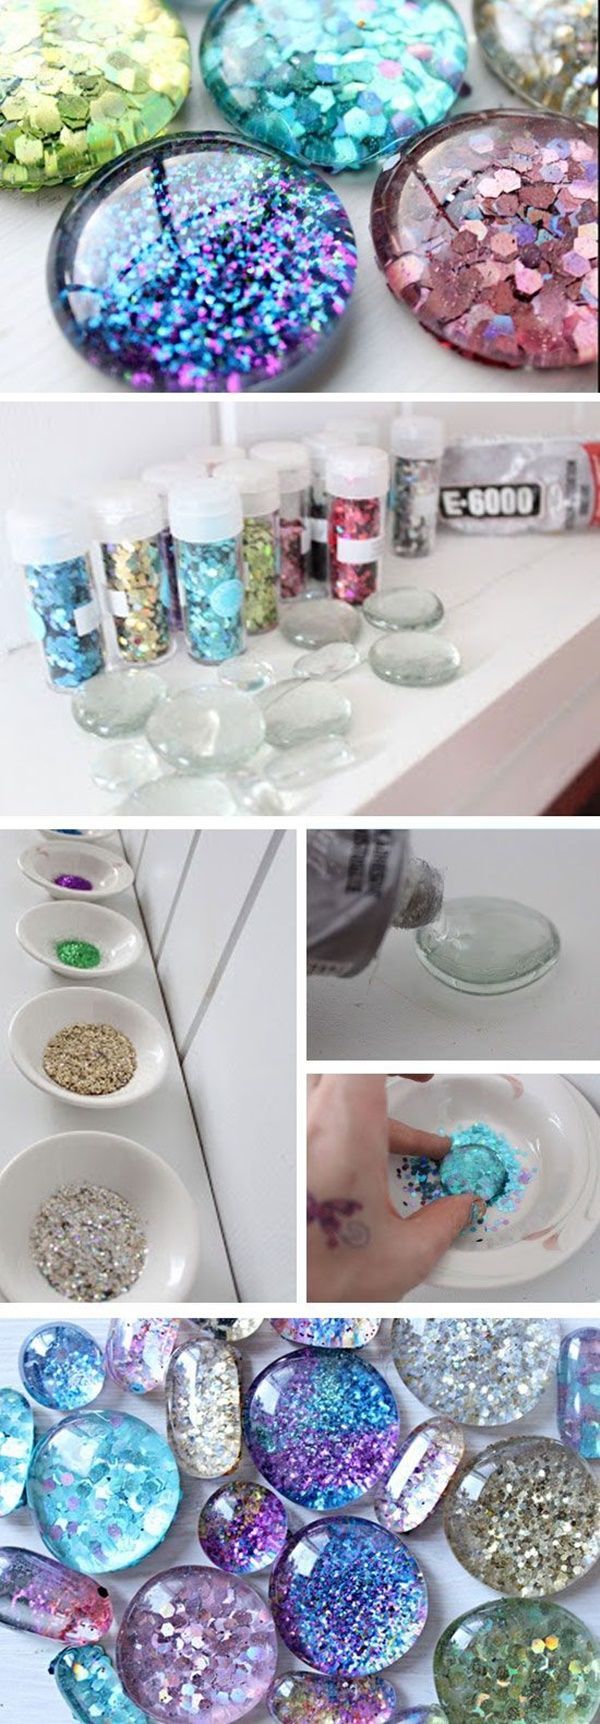 35 Easy Art And Craft Ideas For Teenagers - 35 Easy Art And Craft Ideas For Teenagers -   16 diy Crafts for teenagers ideas